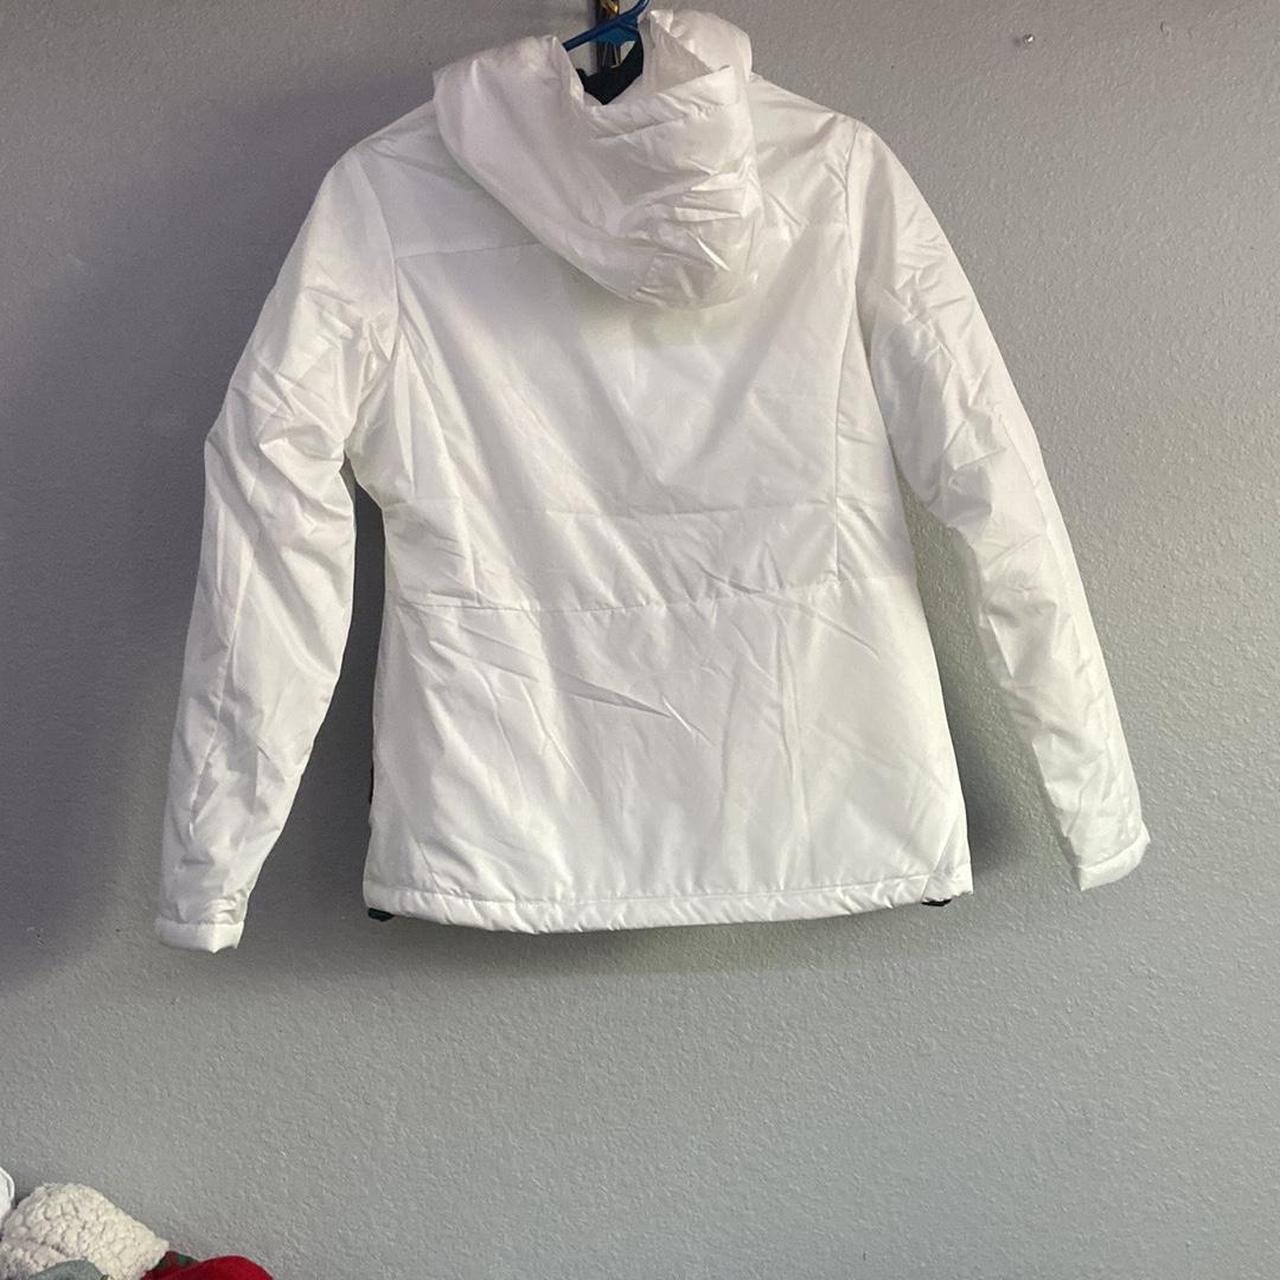 white polo puffer jacket never worn perfect condition - Depop